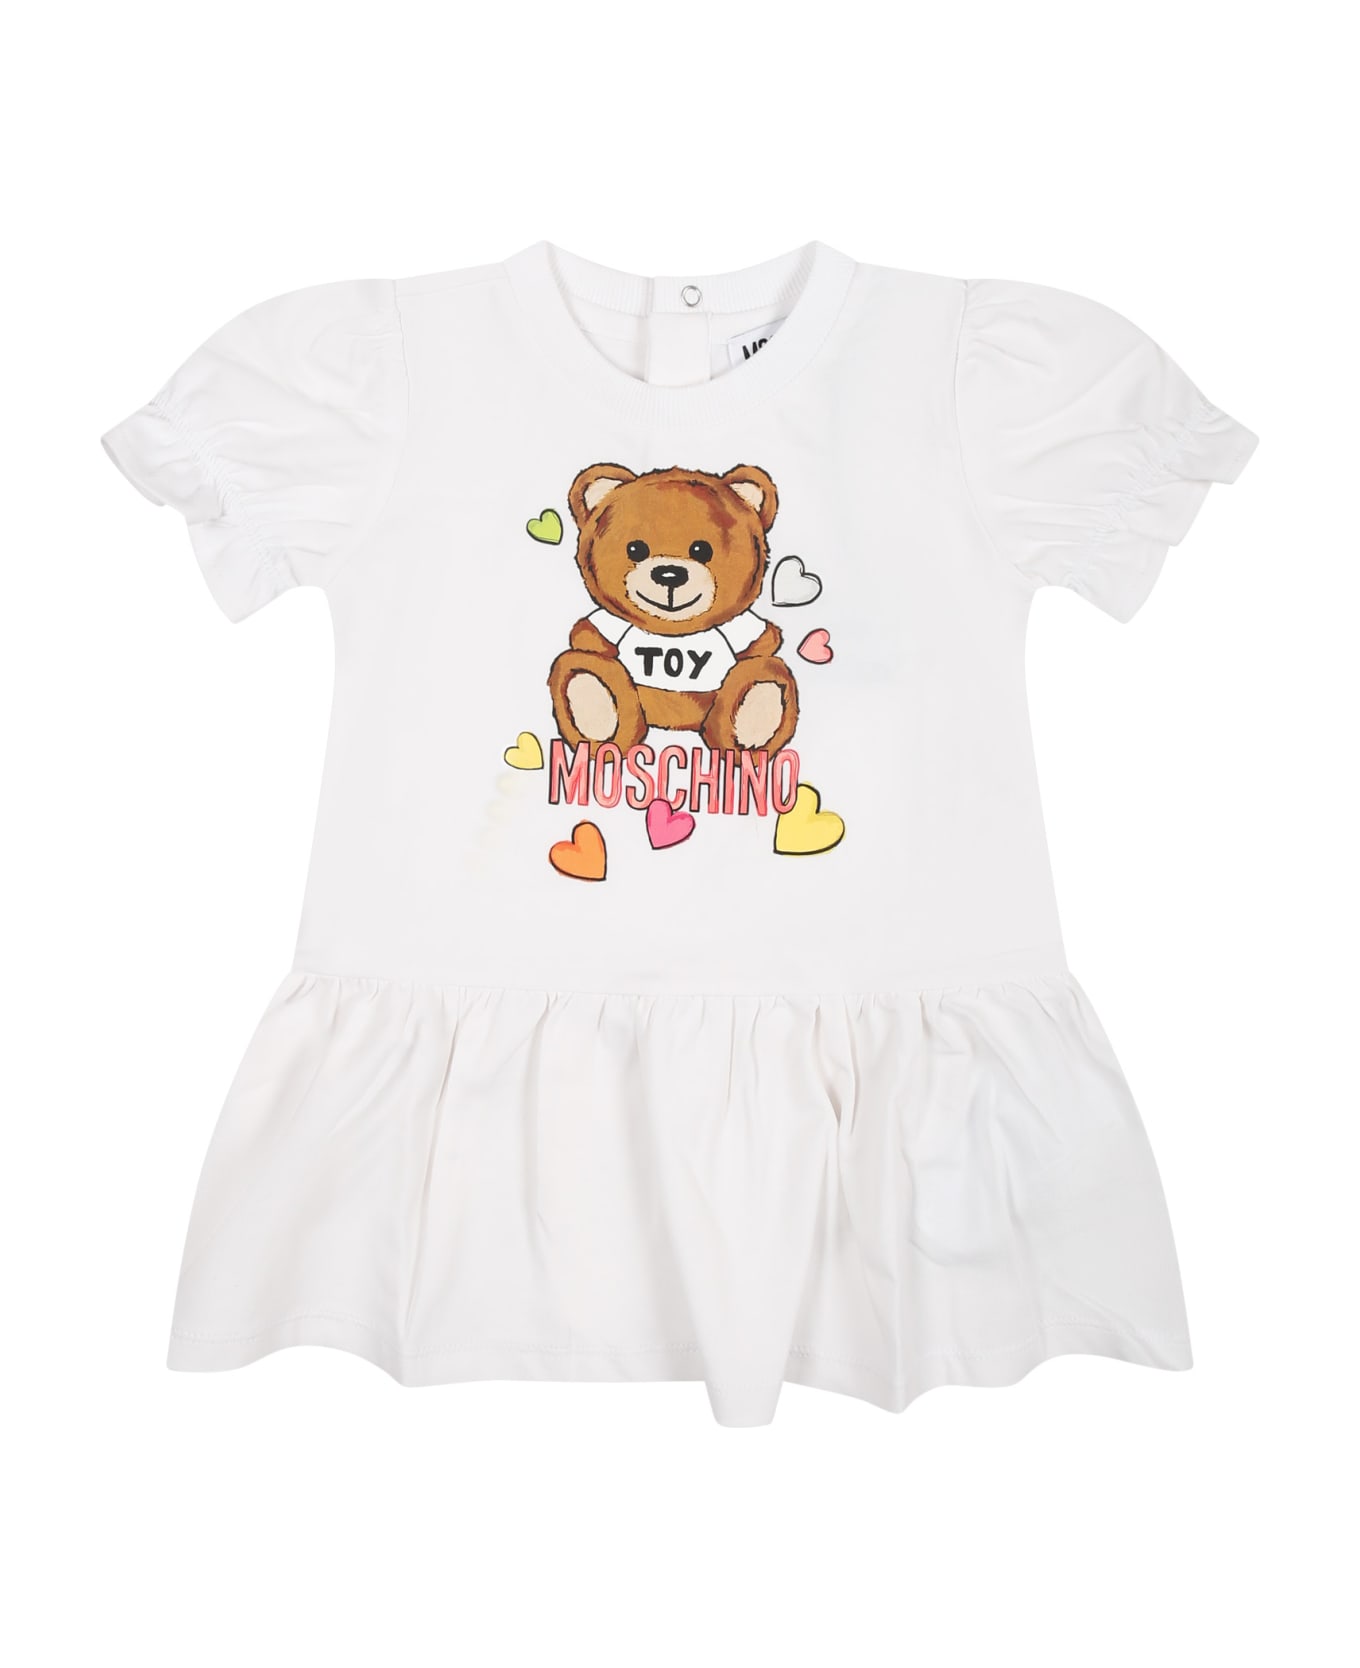 Moschino White Dress For Baby Girl With Teddy Bear Print - White ウェア